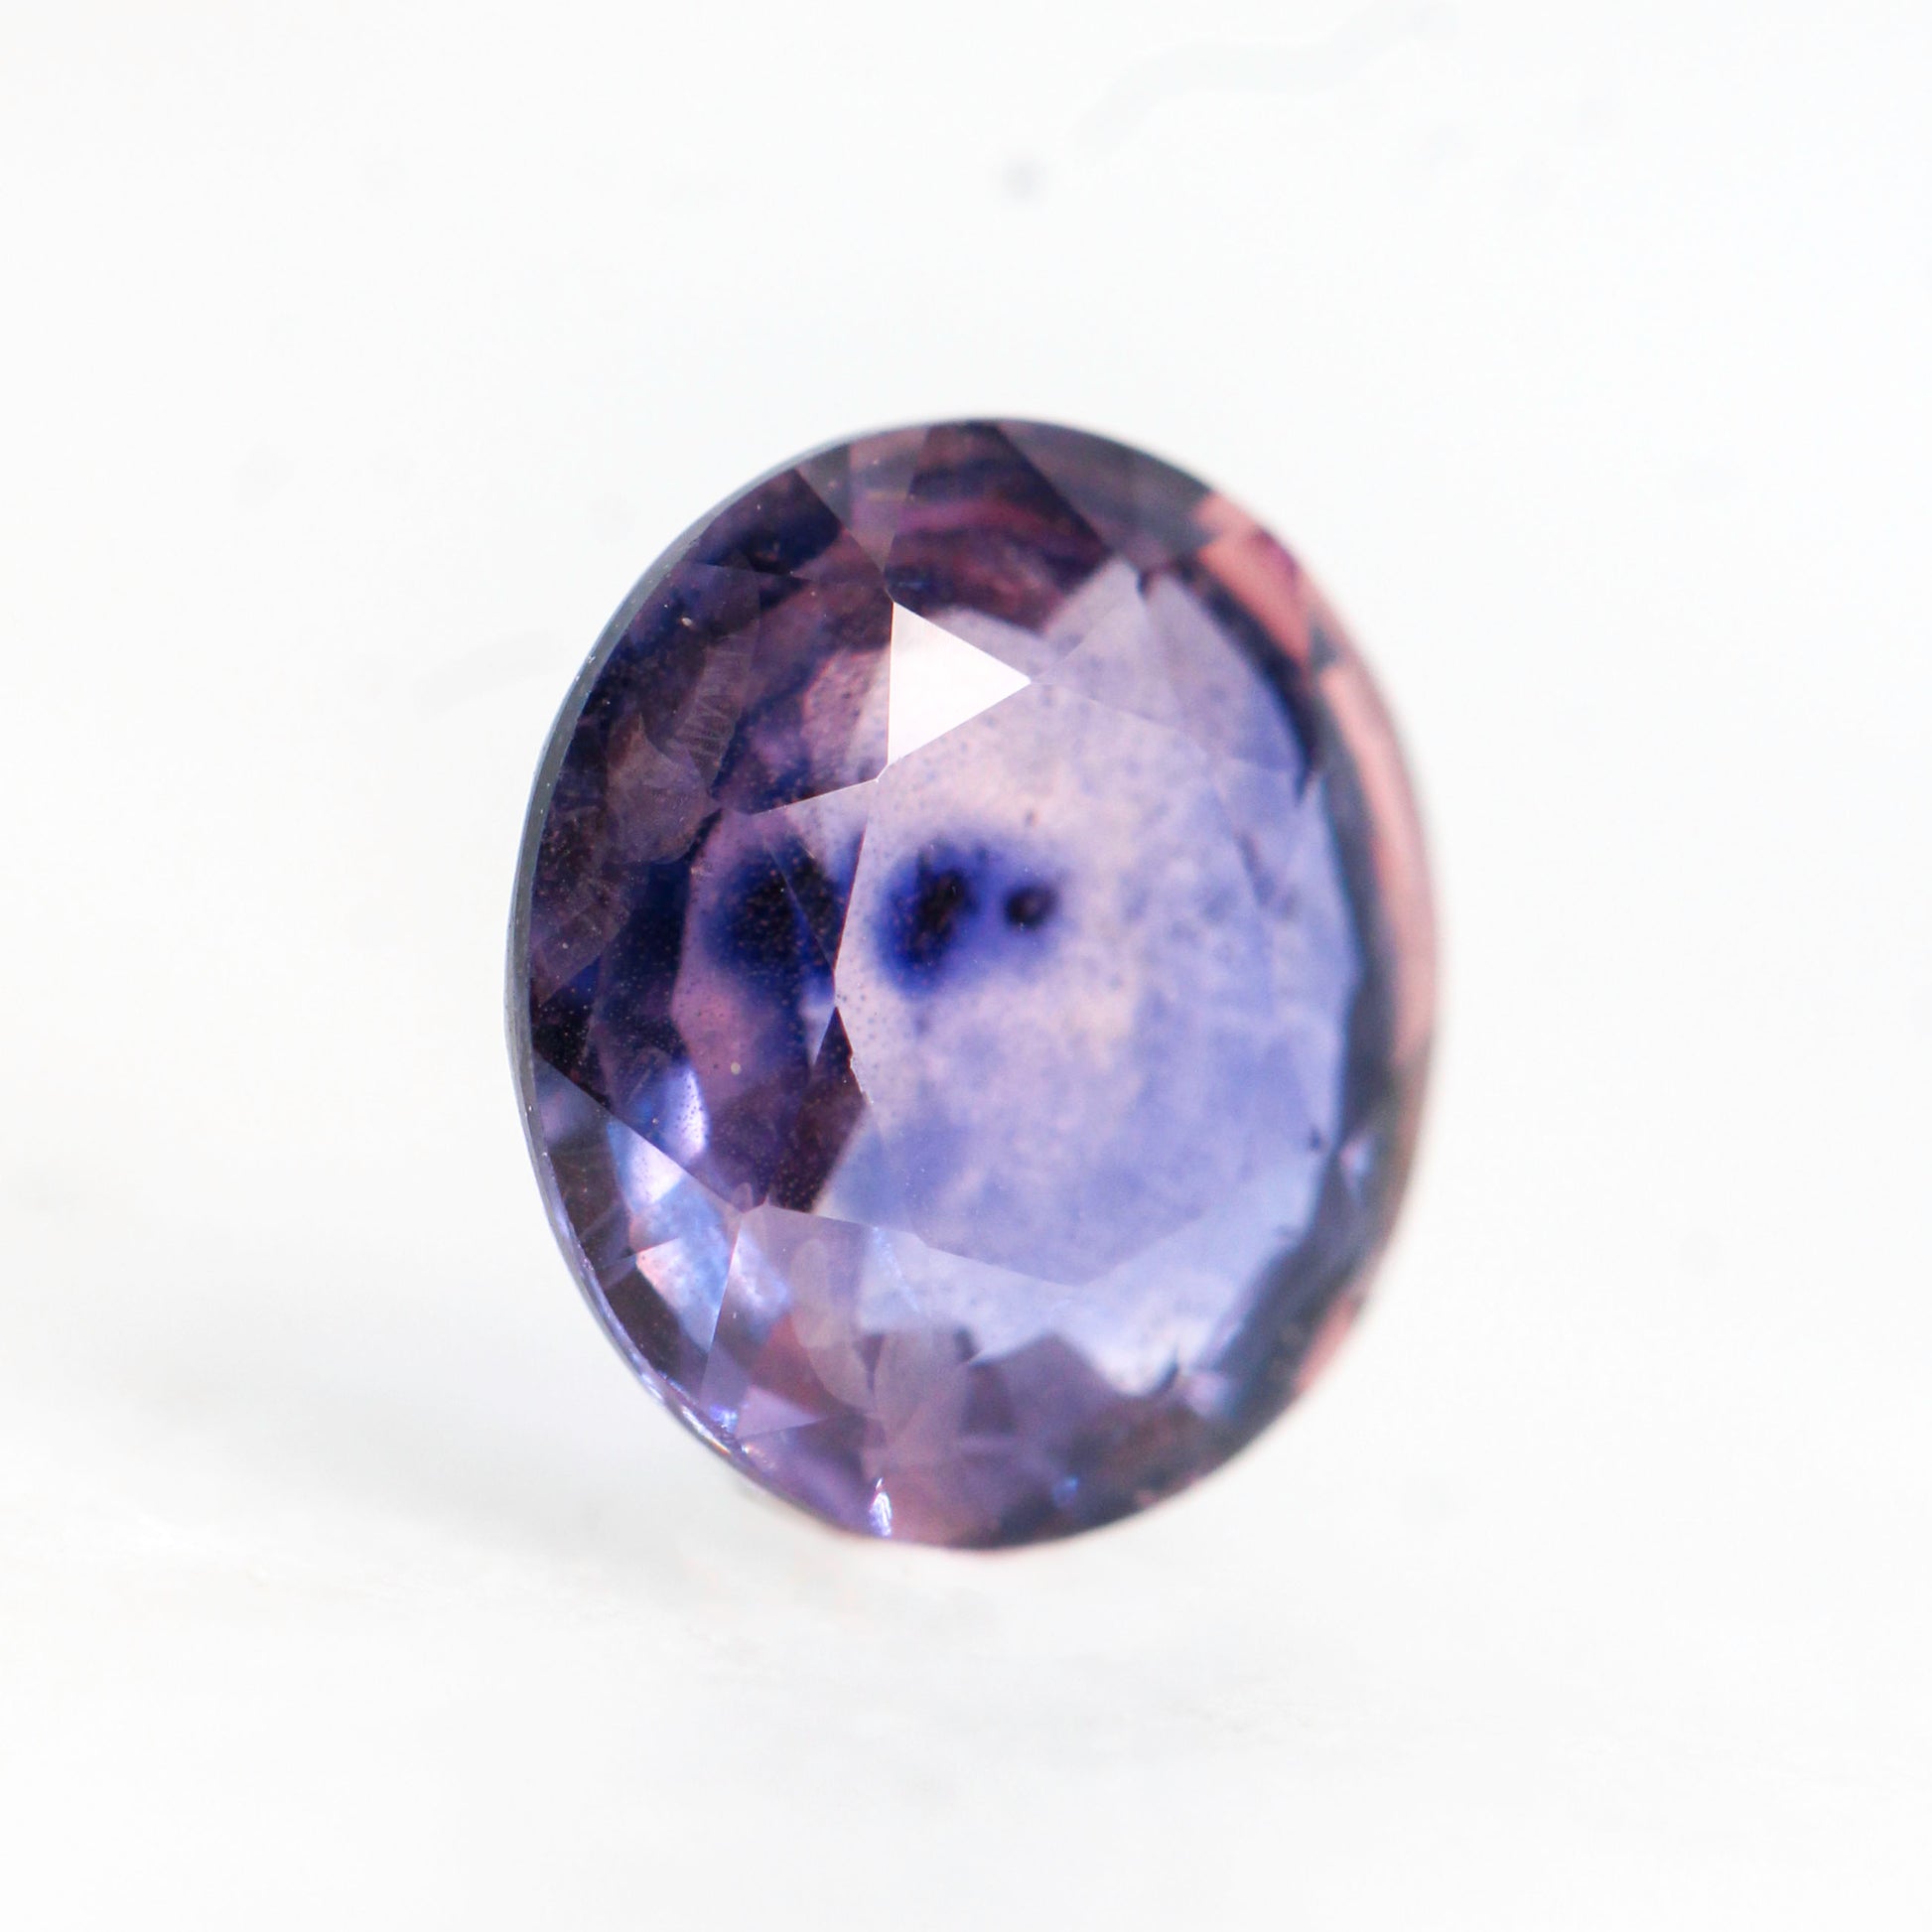 1.41 Carat Purple Oval Sapphire for Custom Work - Inventory Code POS141 - Midwinter Co. Alternative Bridal Rings and Modern Fine Jewelry